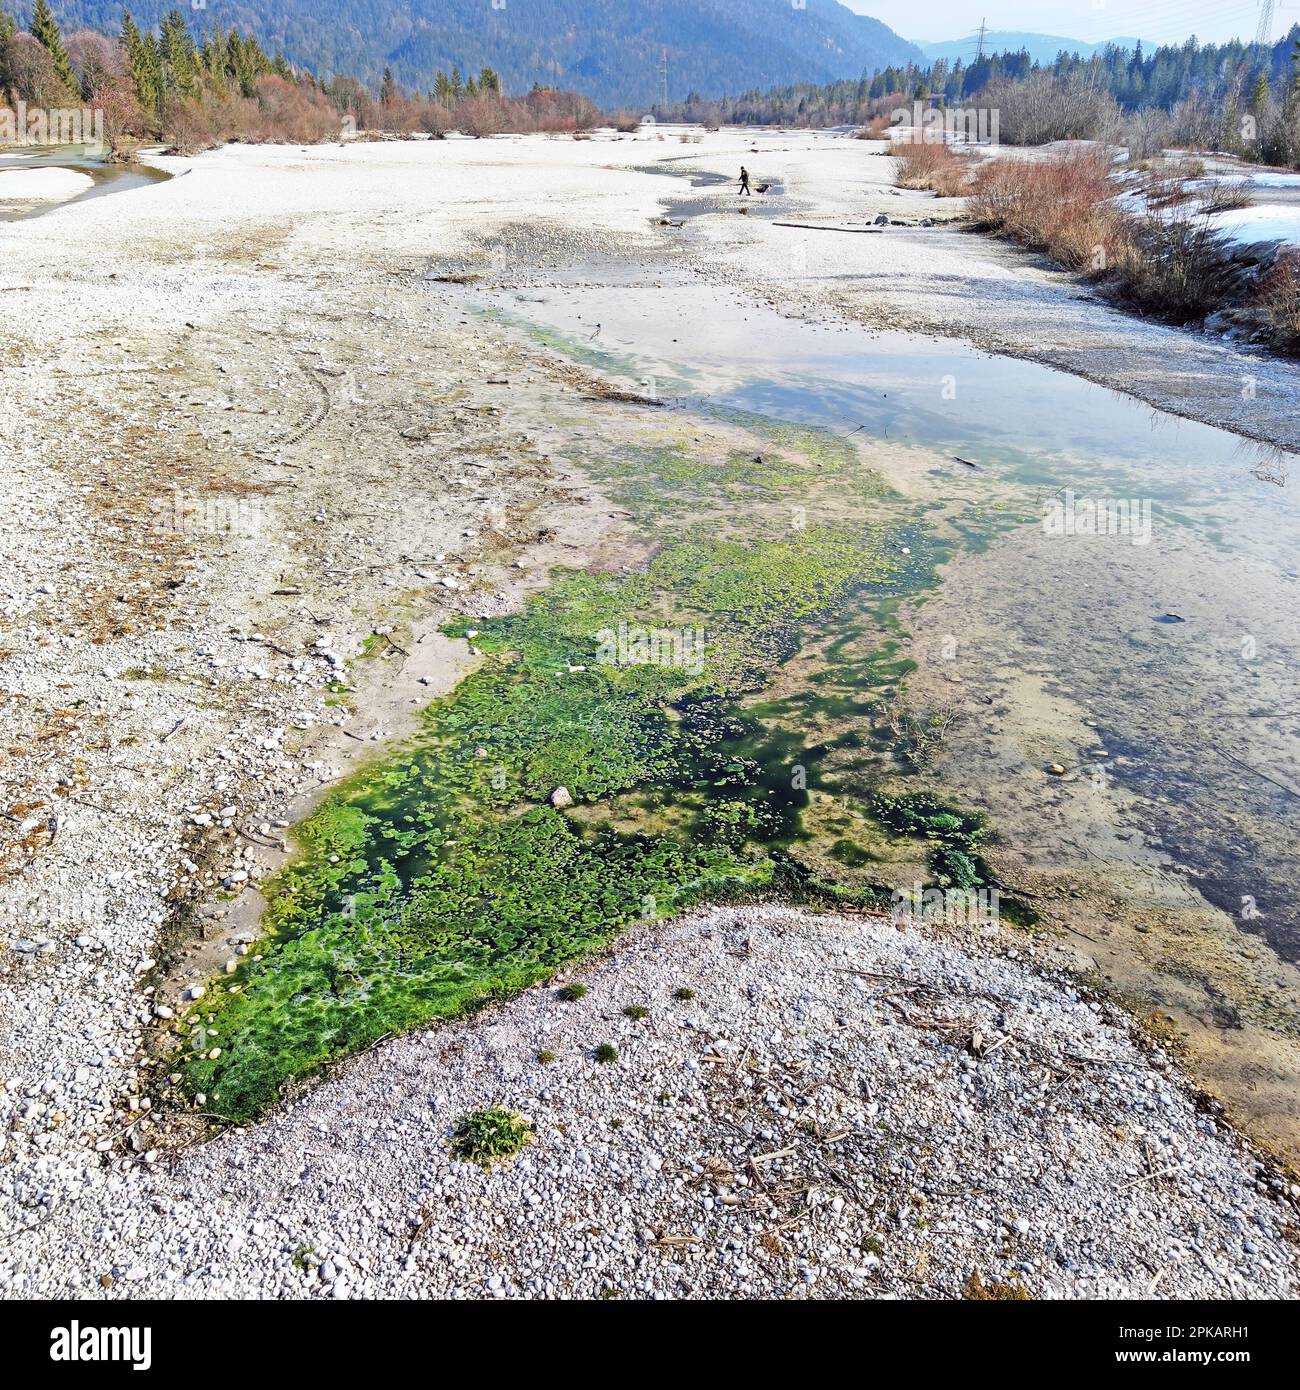 Algae formation in the low water area between gravel banks of the Isar river Stock Photo